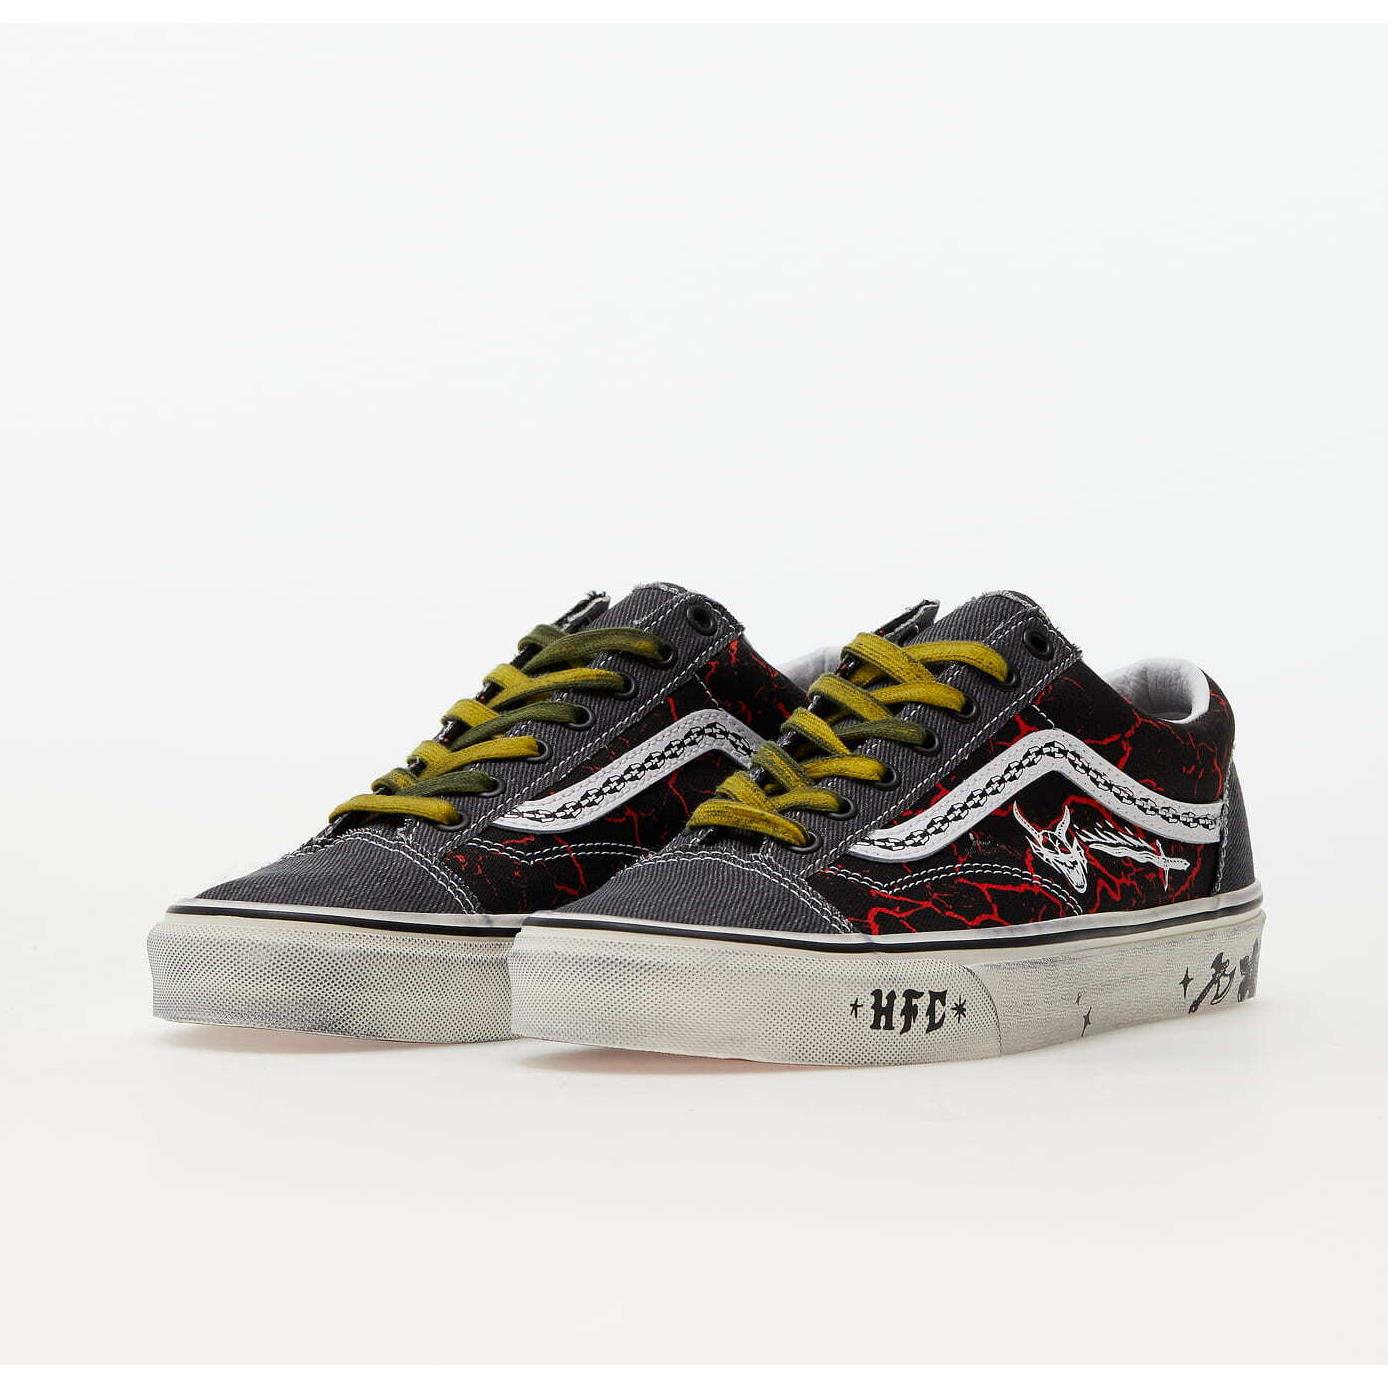 Vans x Stranger Things Style 36 VN0A3DZ3Y091 Black Red Shoes Sneakers